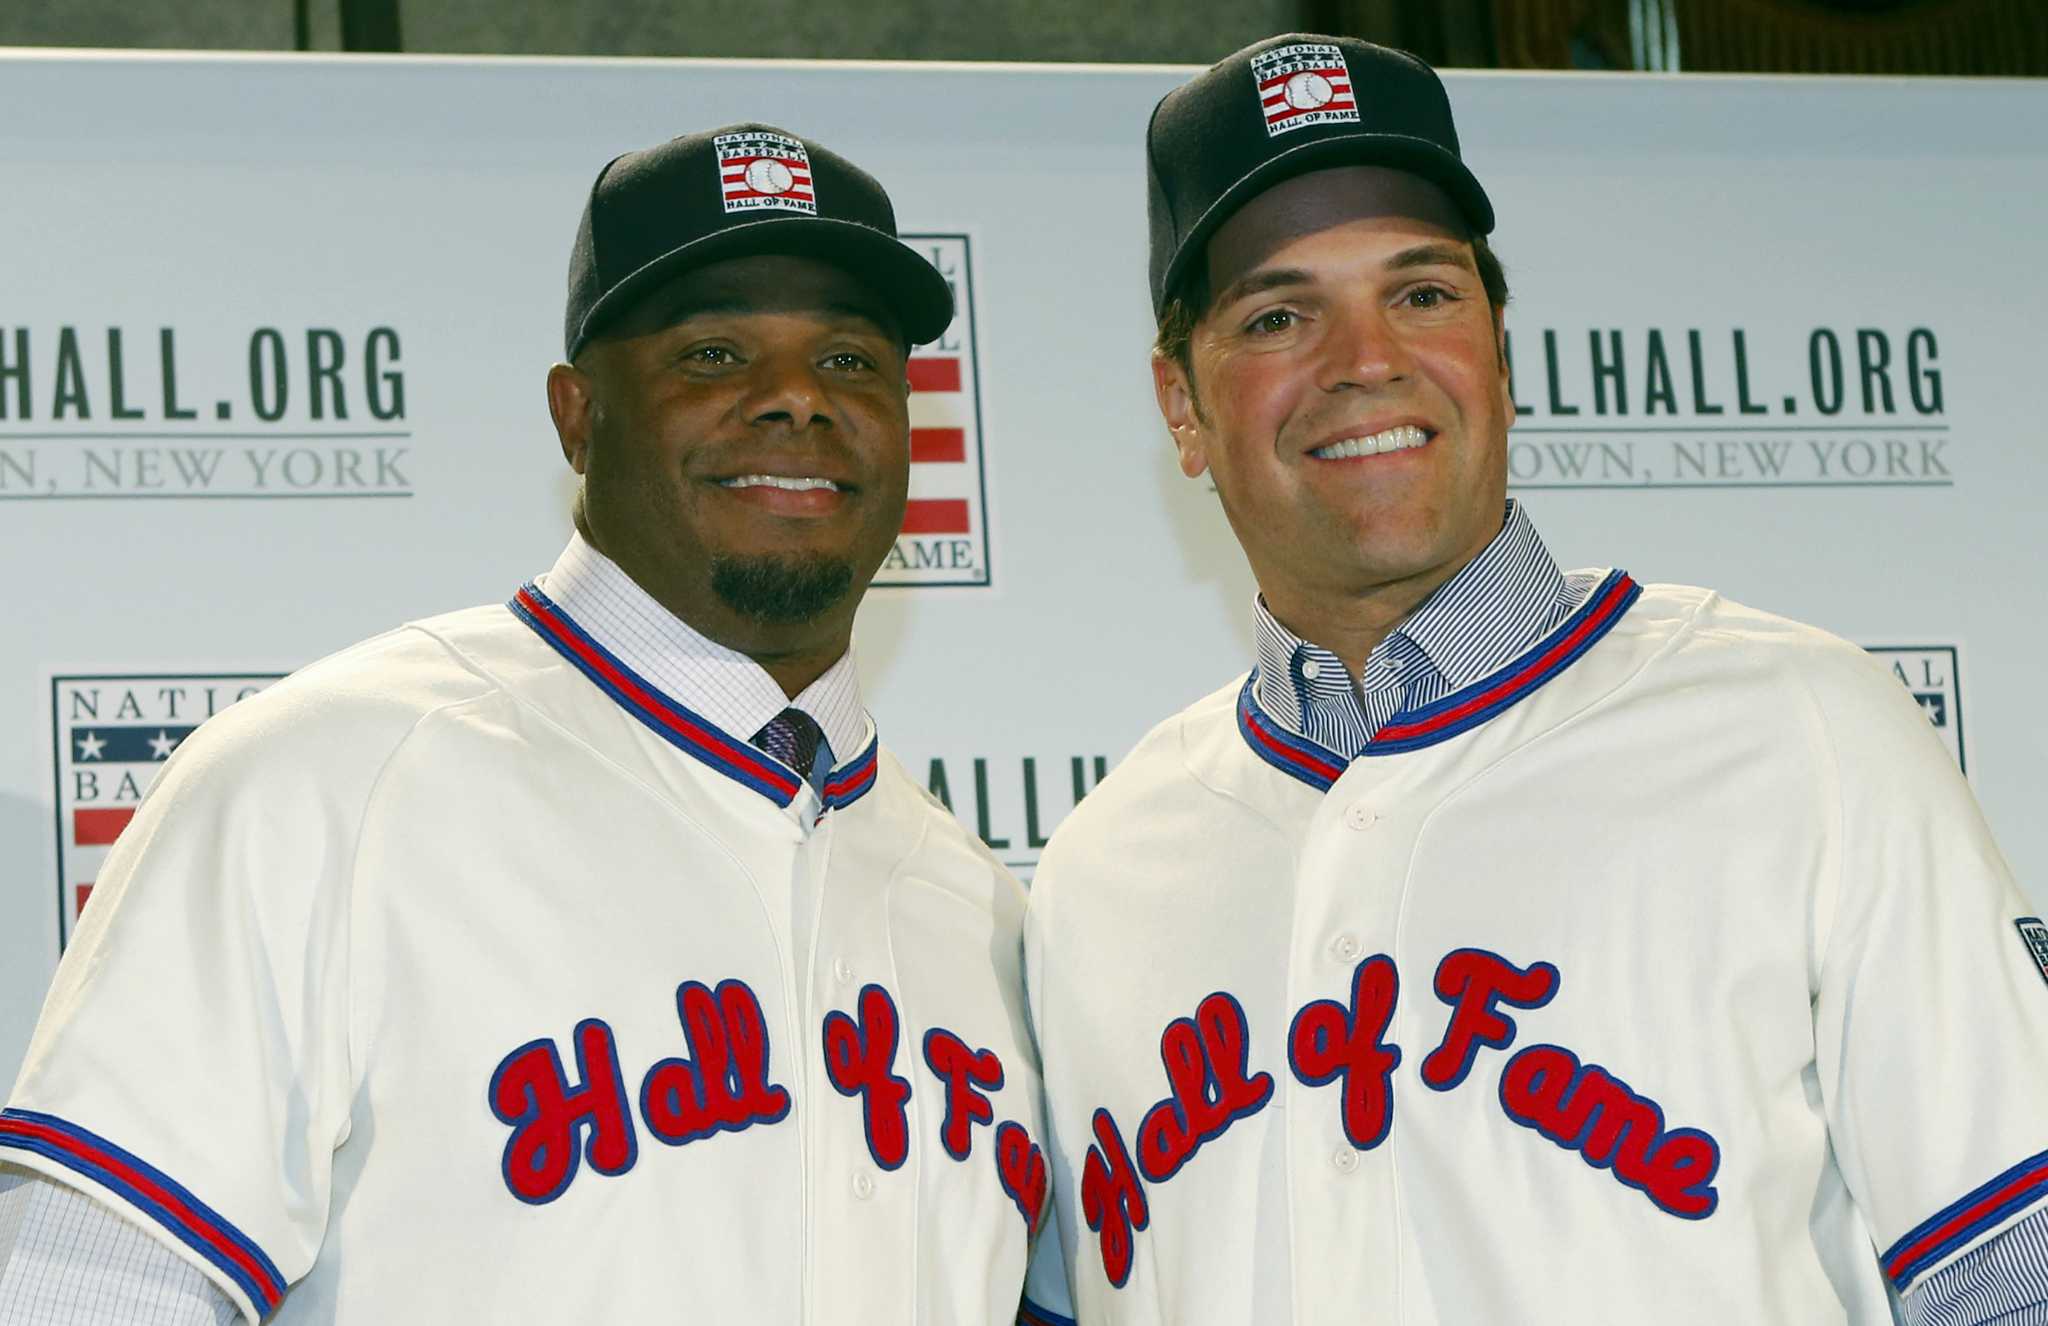 Mike Piazza thankful of Dodgers in emotional Hall of Fame speech